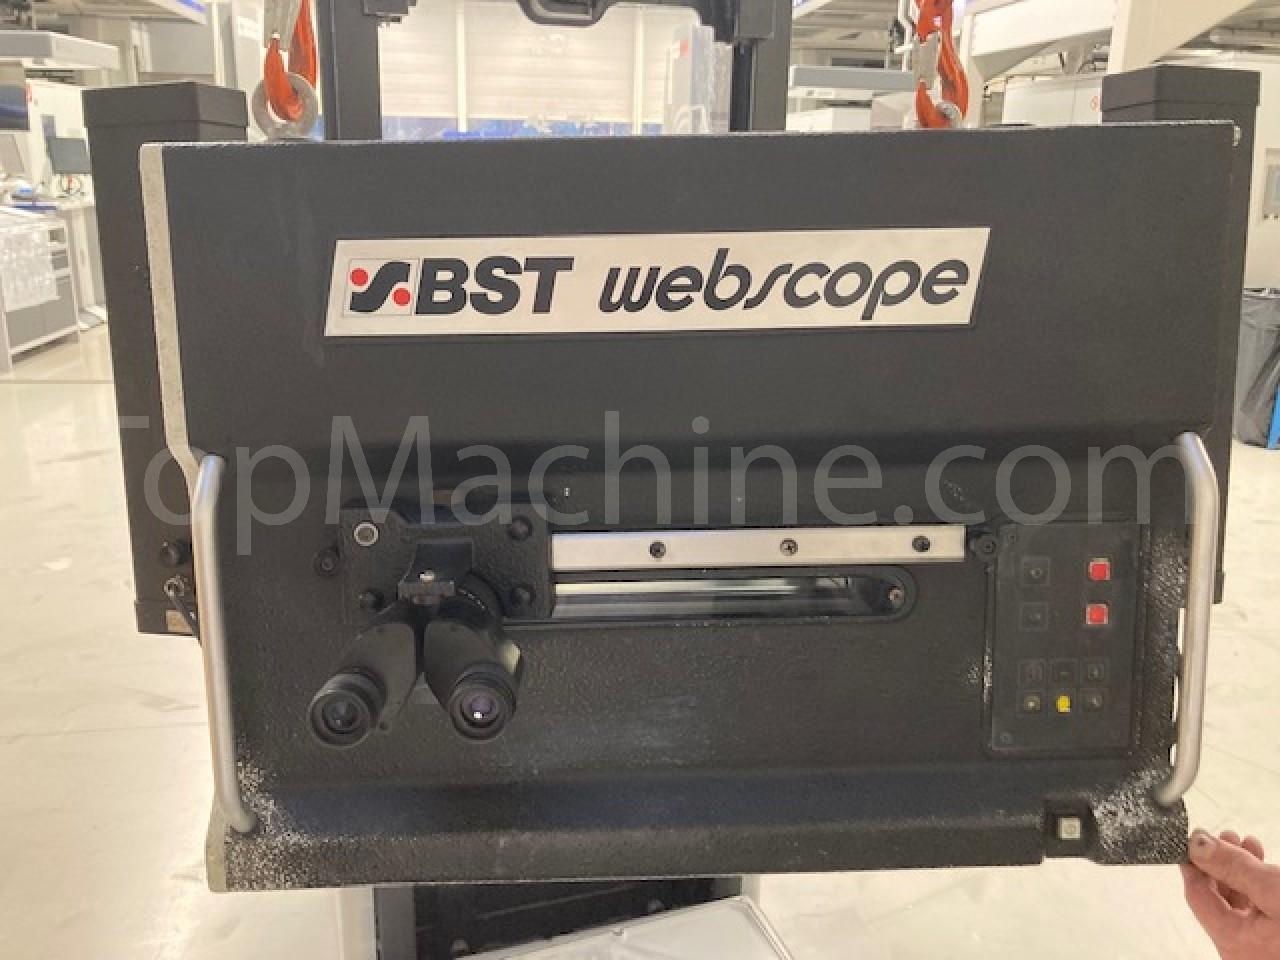 Used BST Webscope B60 Film & Print Miscellaneous